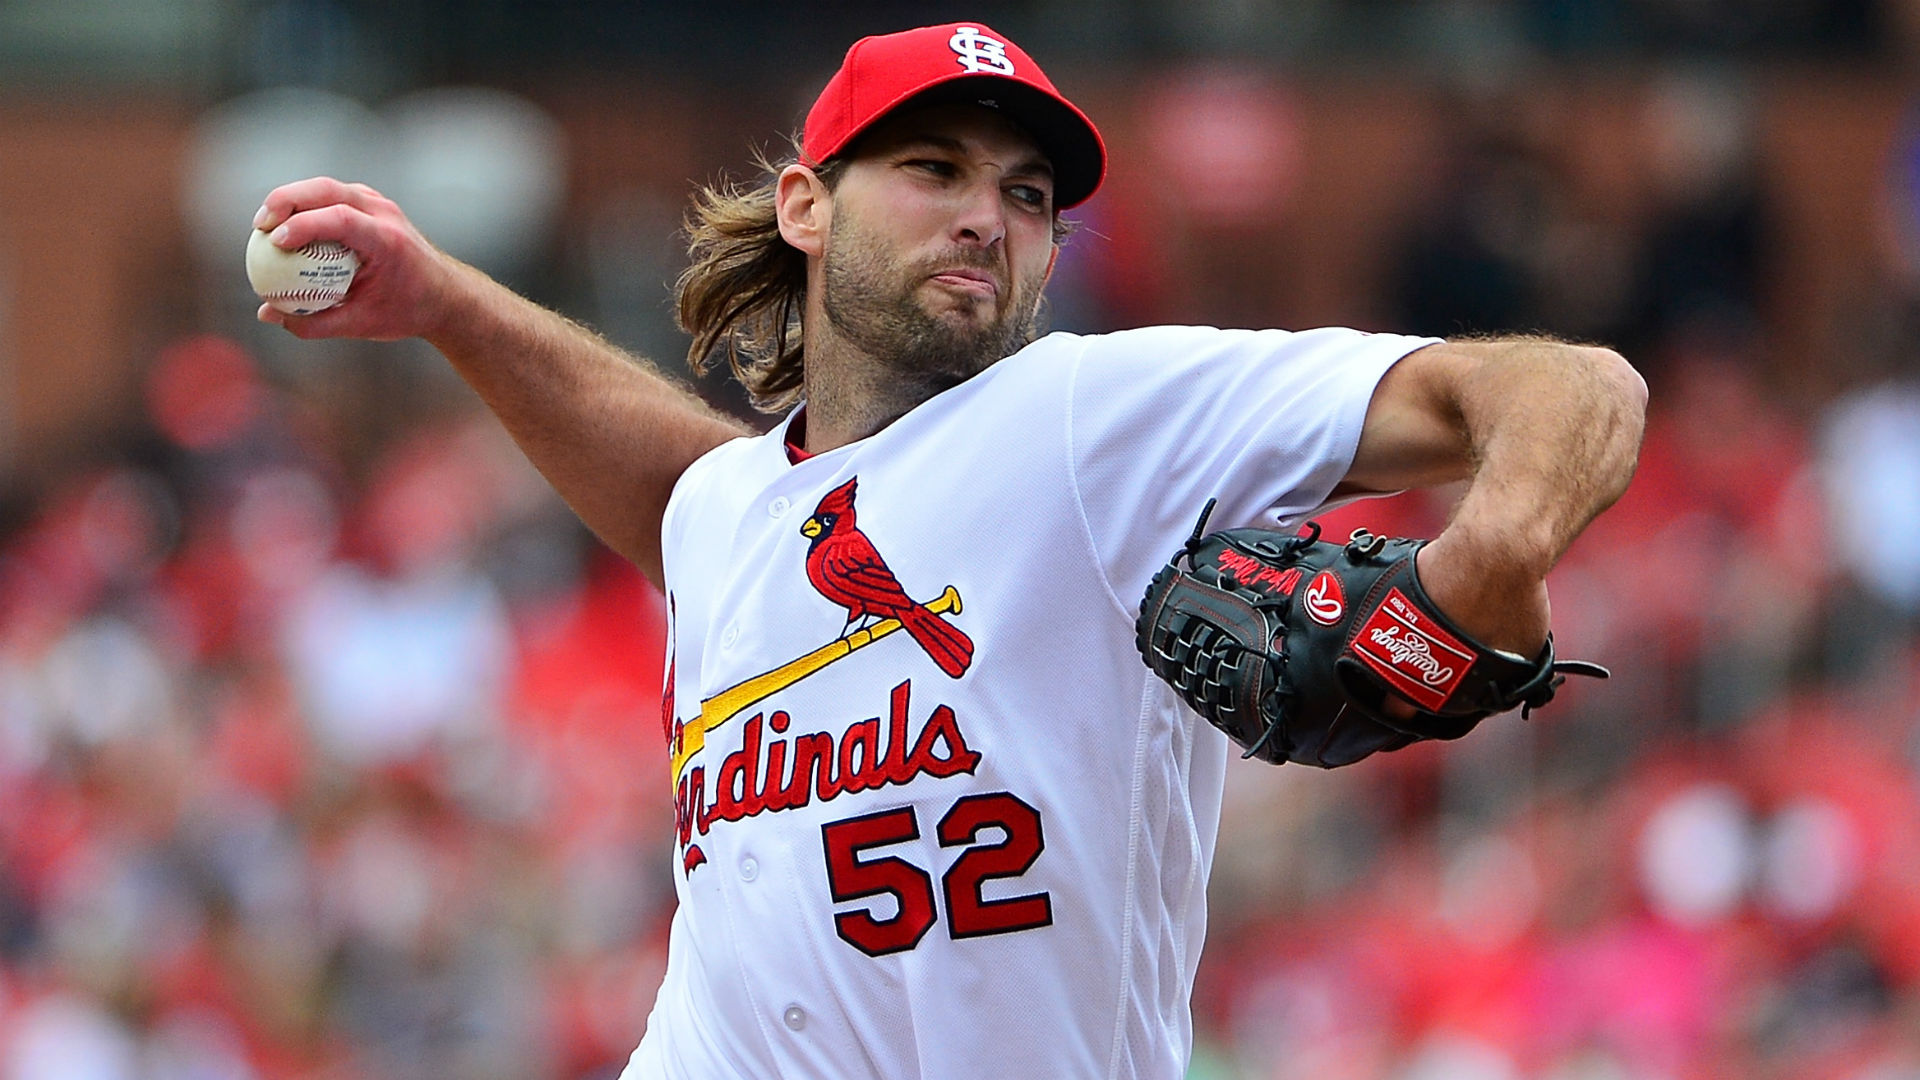 Wacha (1-0) has a team-best 4.64 ERA and 24 strikeouts in 20 1/3 innings this season for the 12-9 Cardinals.